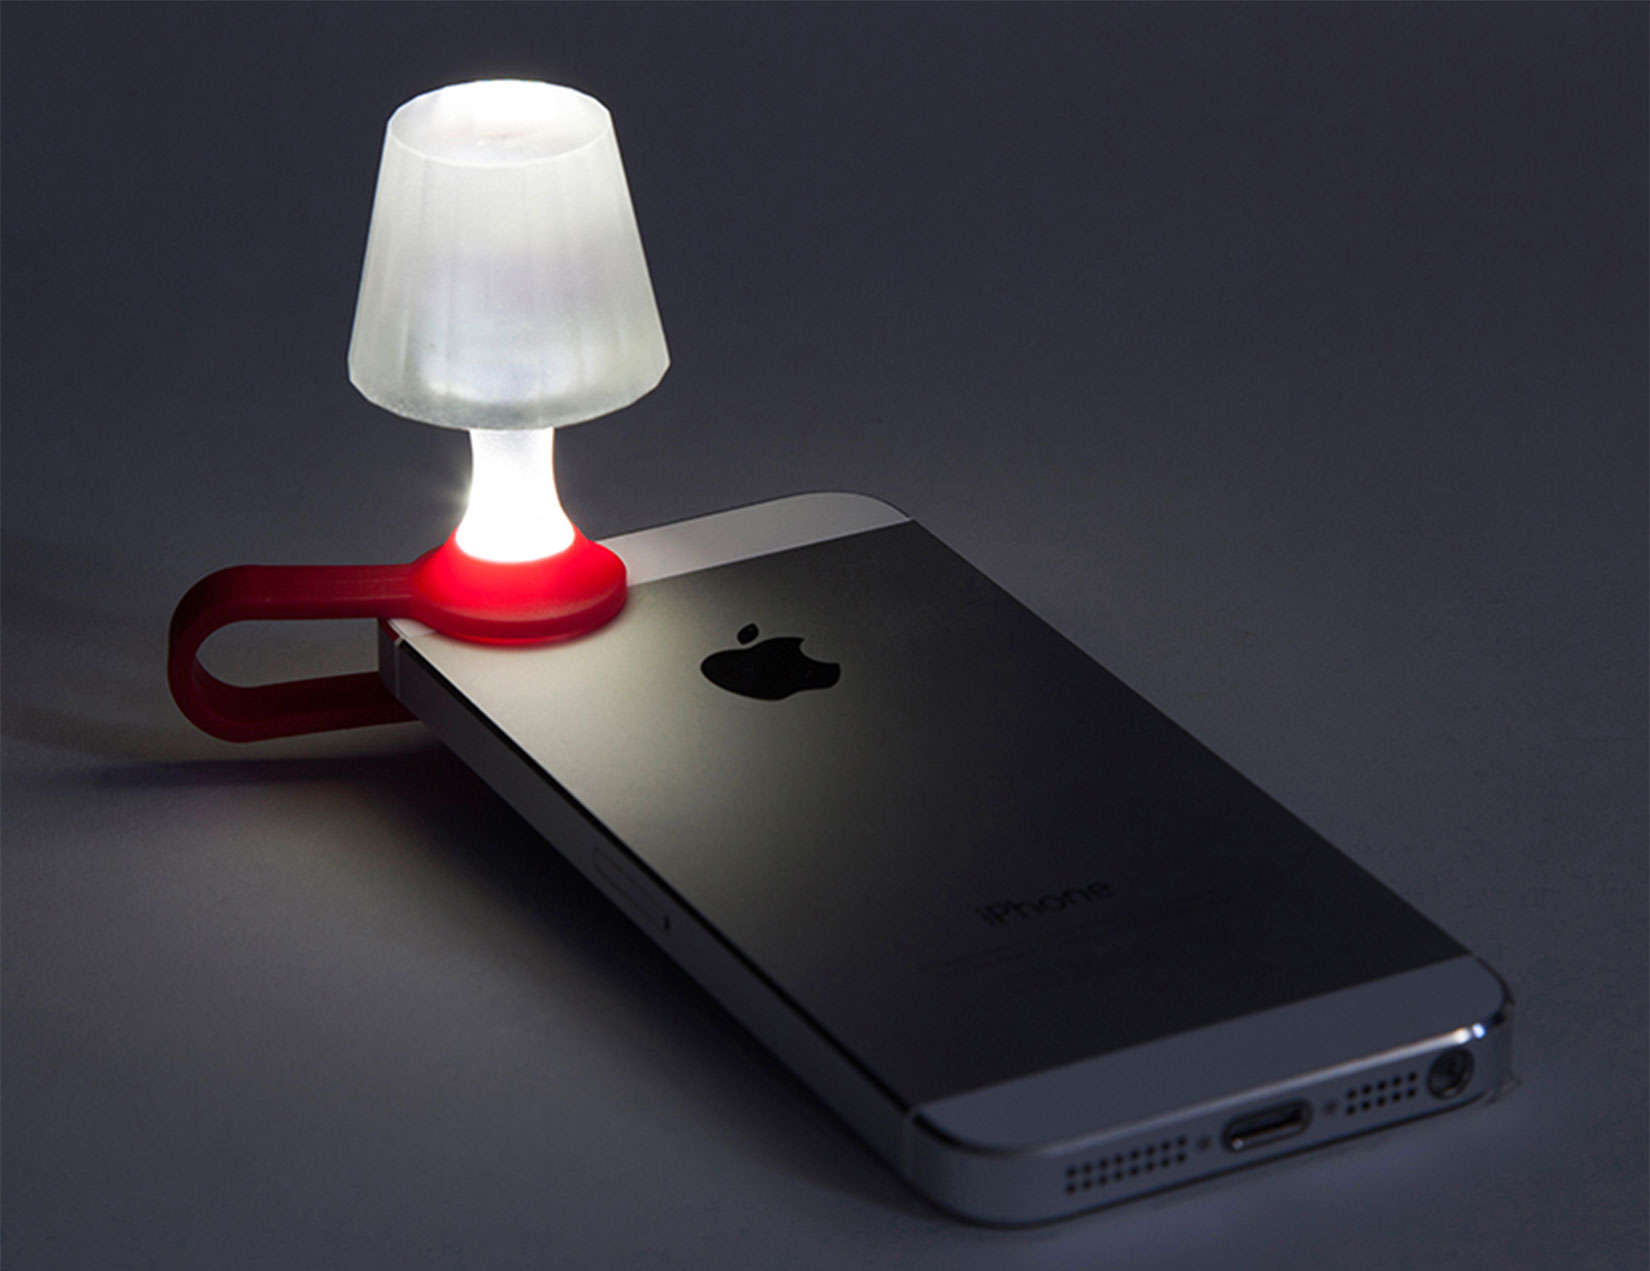 Your iPhone and flashlight app can create a cozy ambiance for reading.